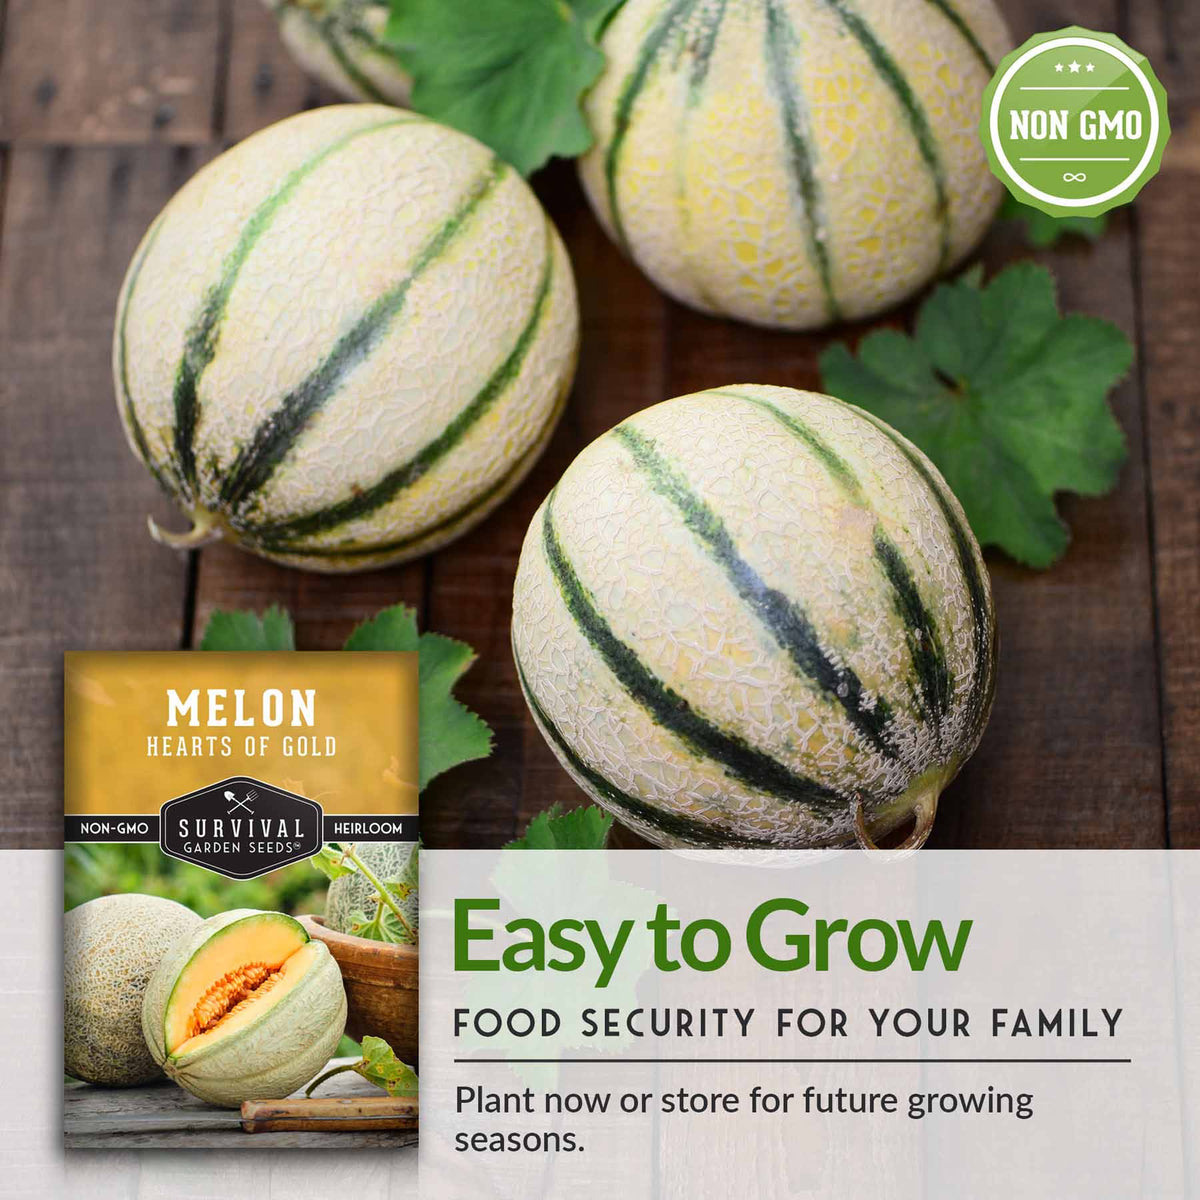 Melon is easy to grow